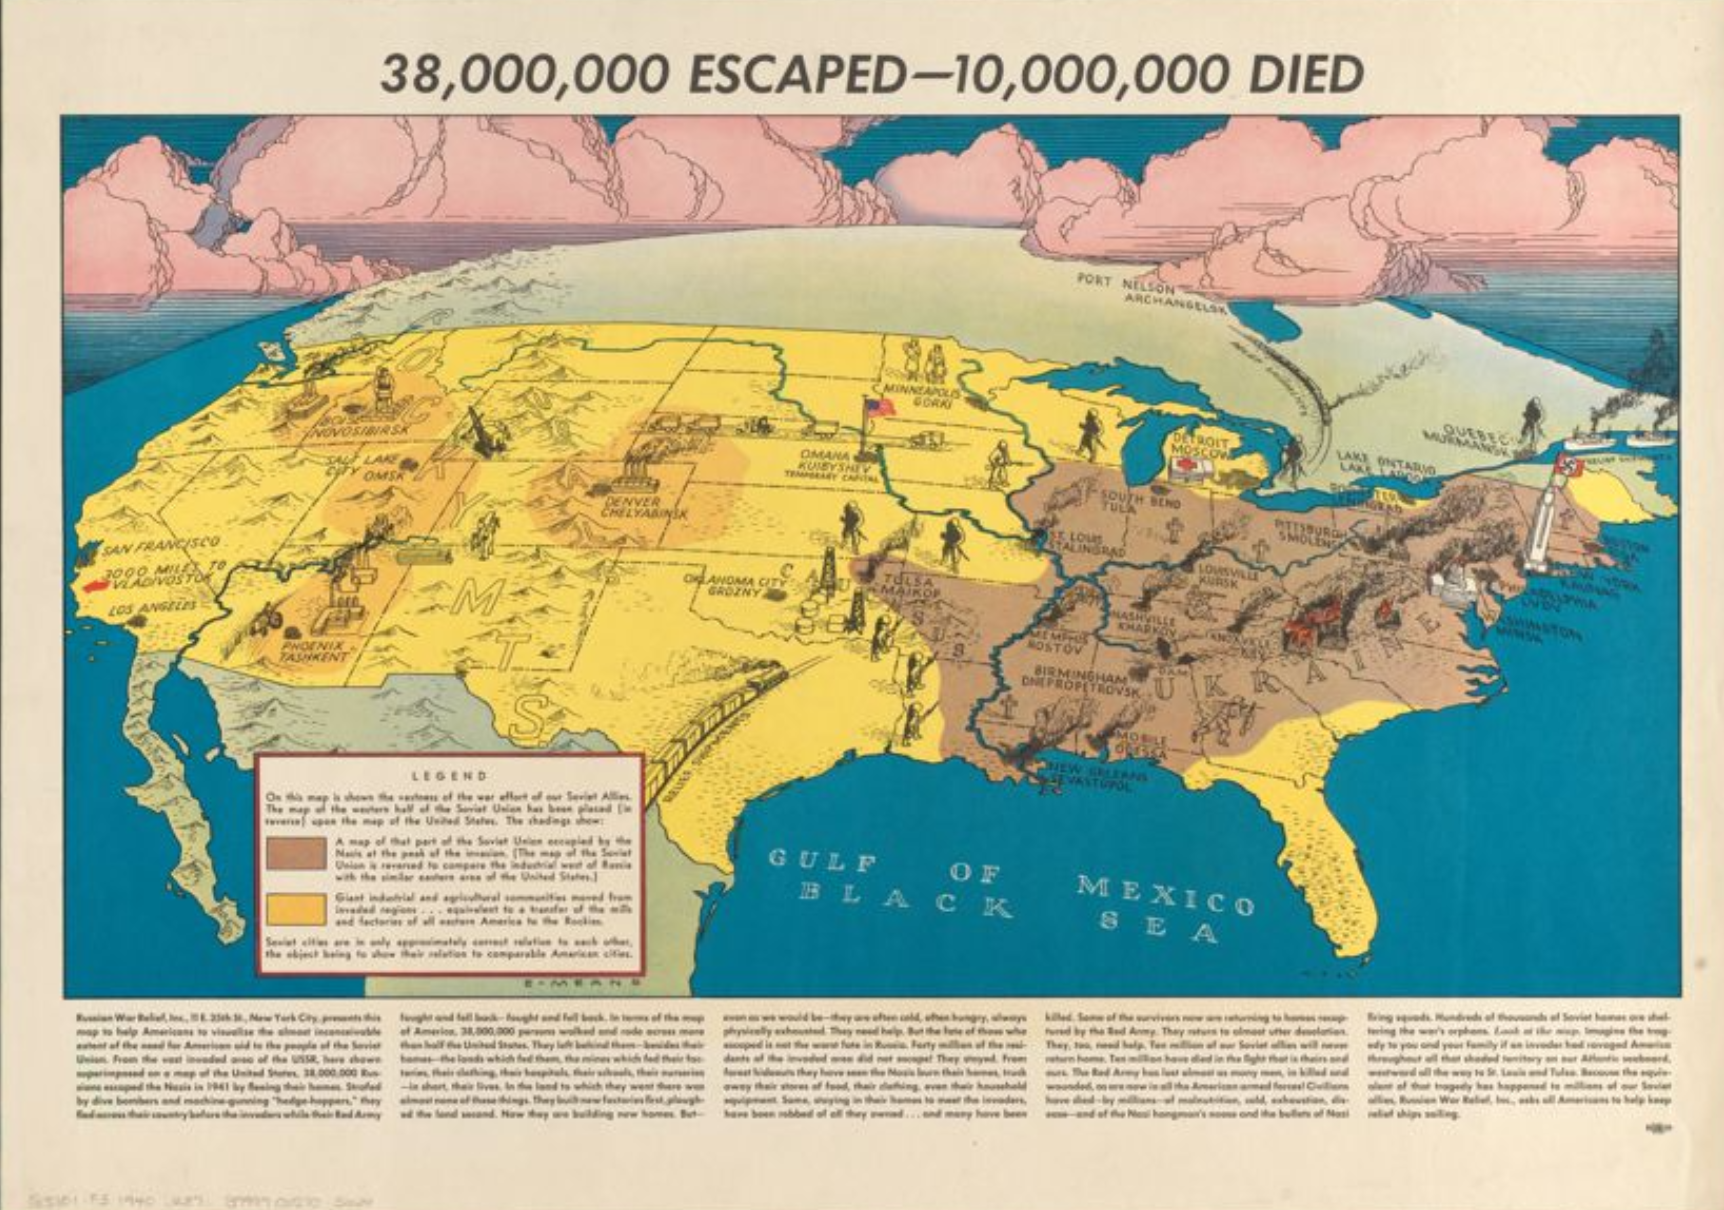 38,000,000 Escaped—10,000,000 Died